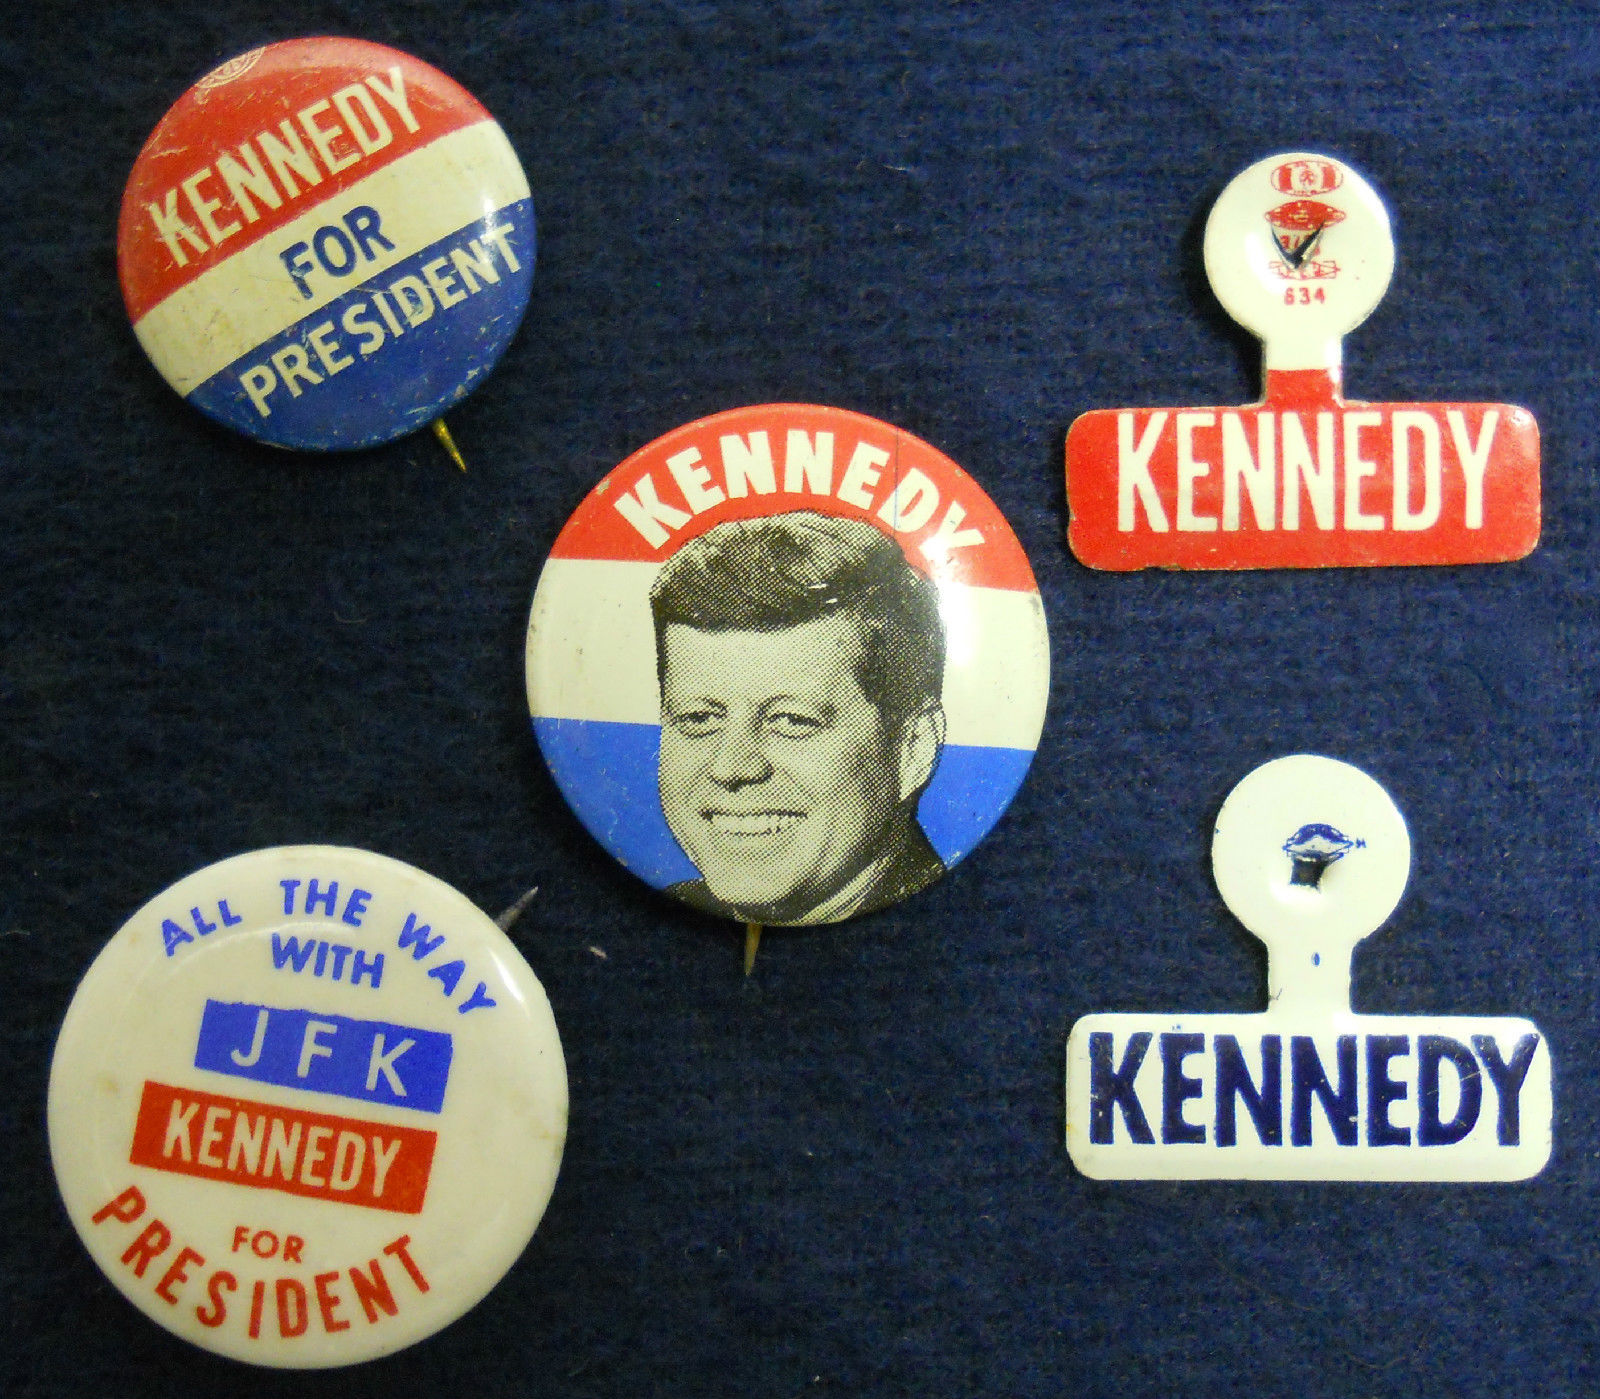 All The Way With Jfk For President Campaign Button 1960 John F Kennedy Pins Antique Price 